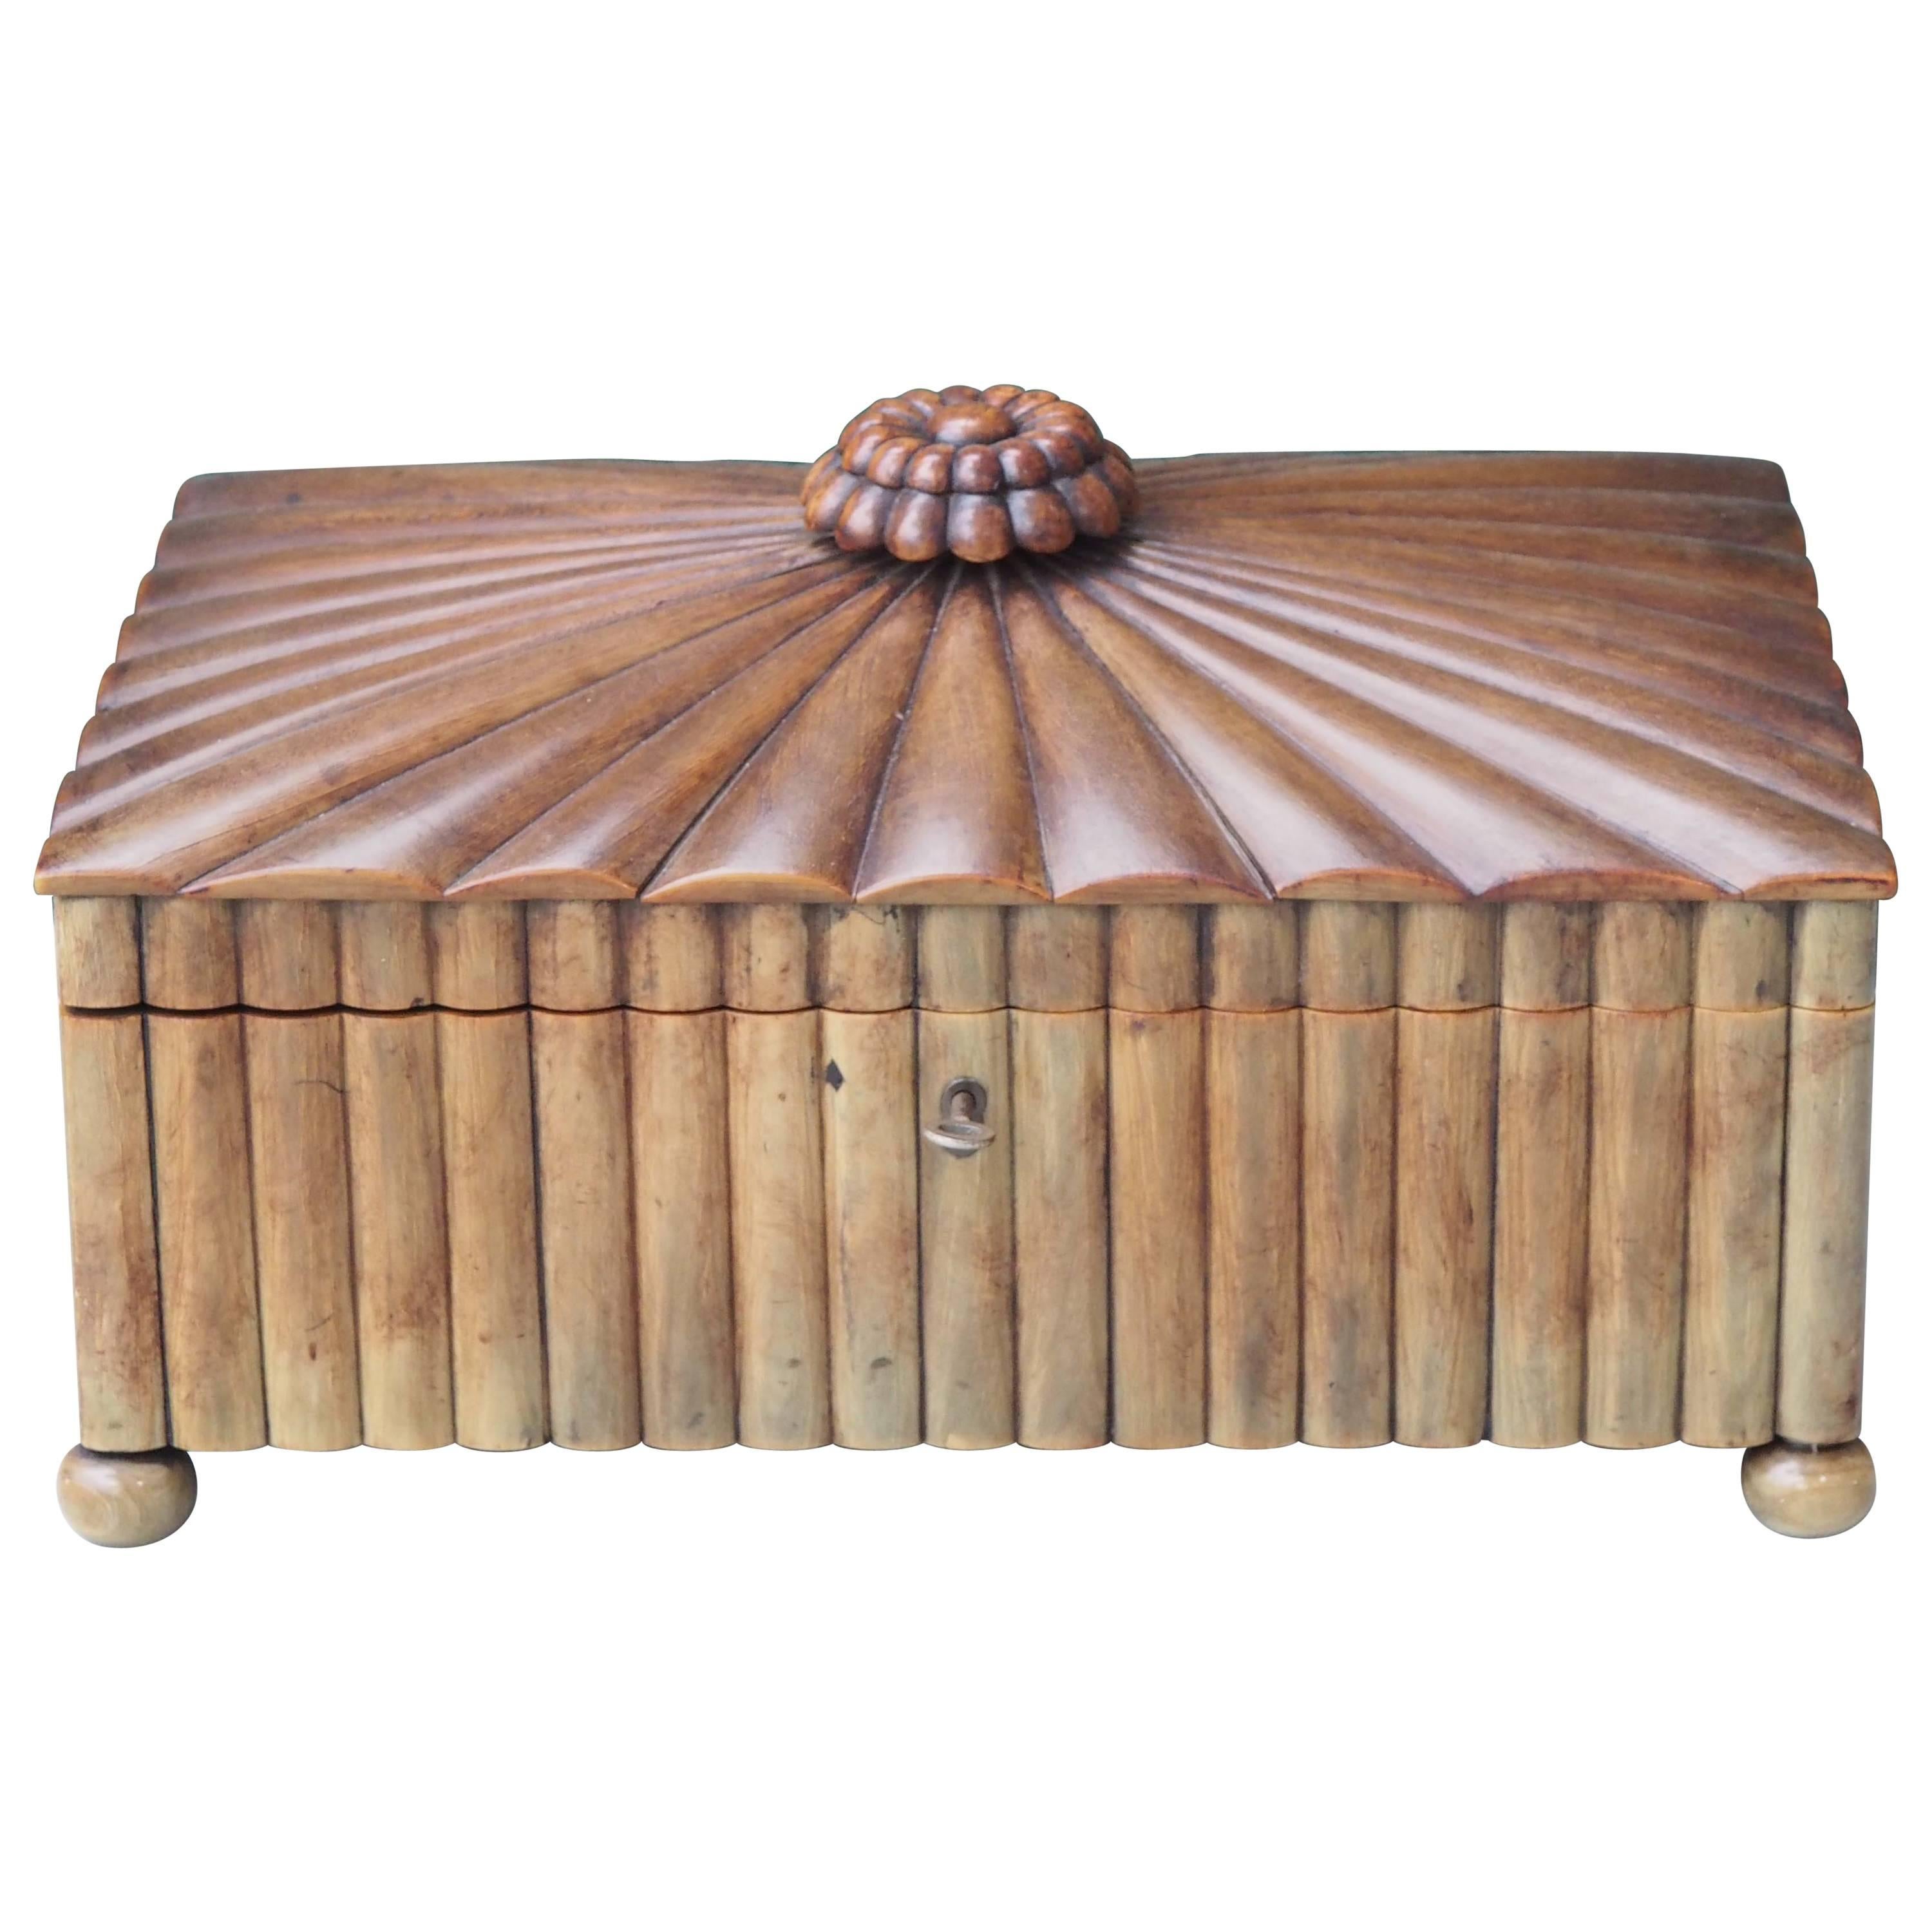 19th Century Indian Buffalo Horn Sewing Box For Sale